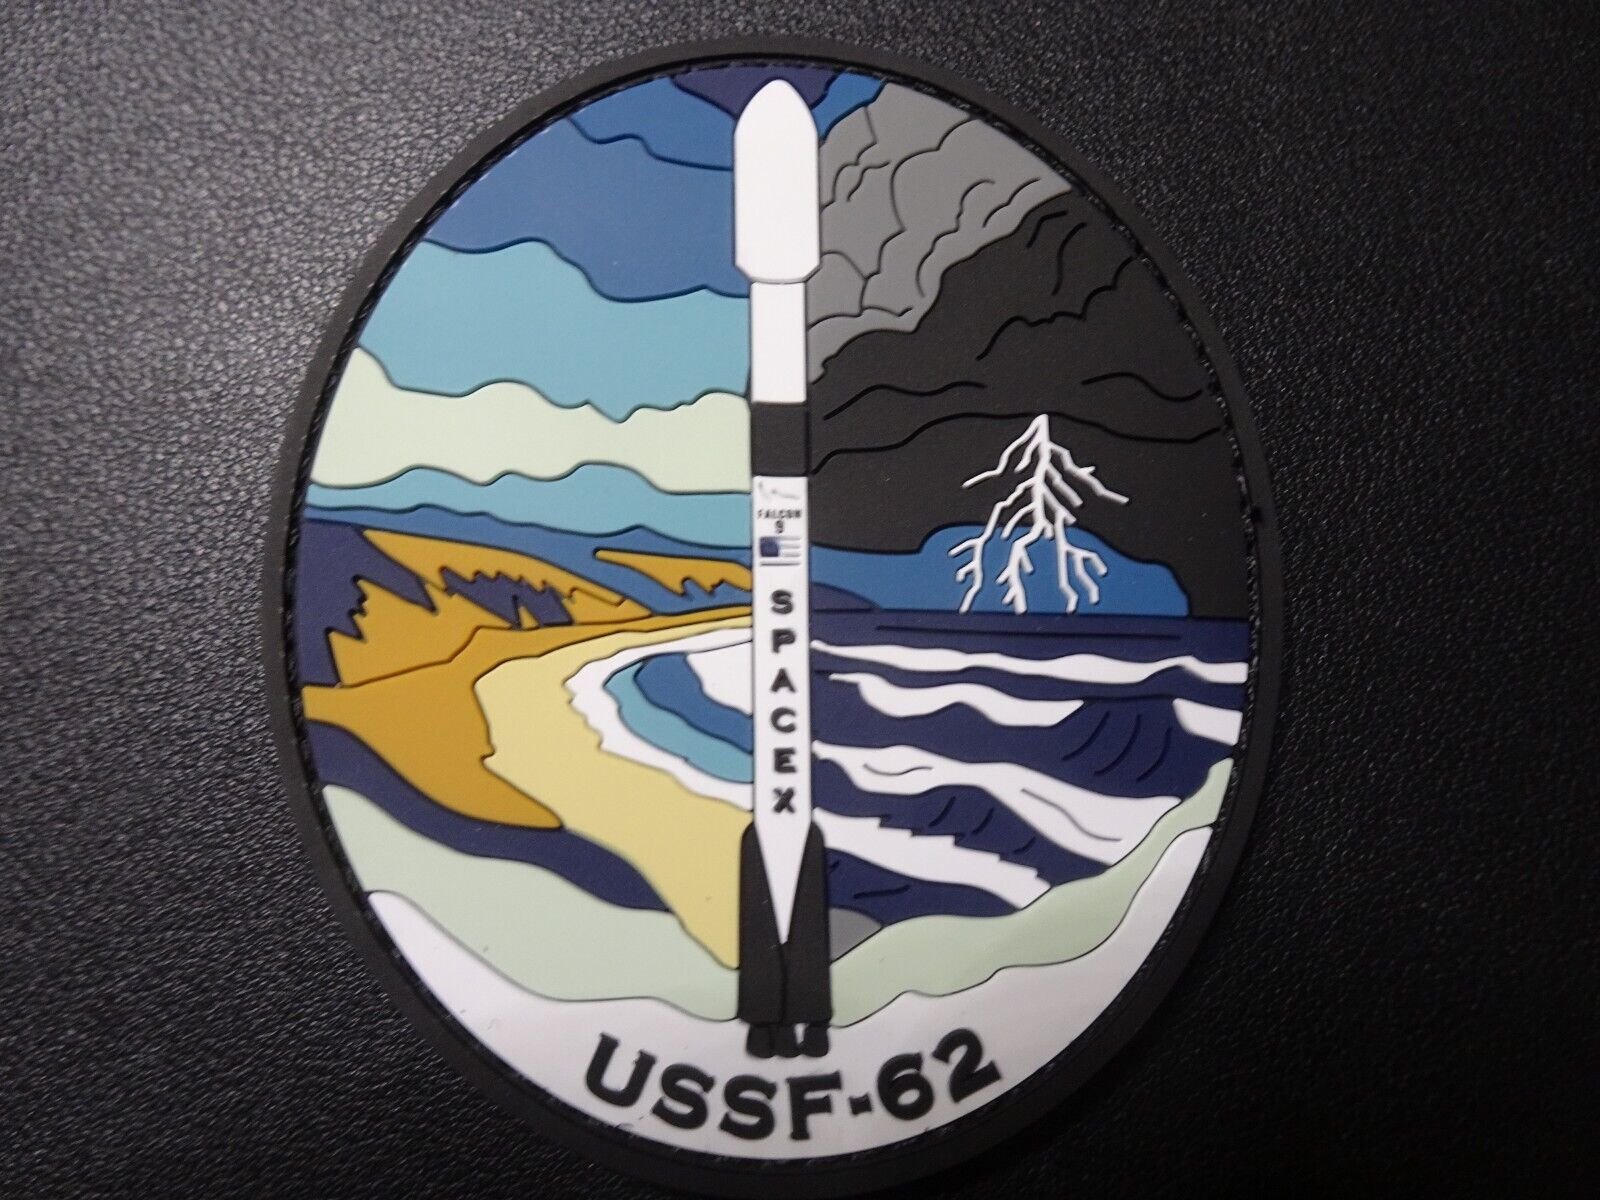 VSFB Western Range SPACE-X USSF-62 SLD-30 Mission Patch